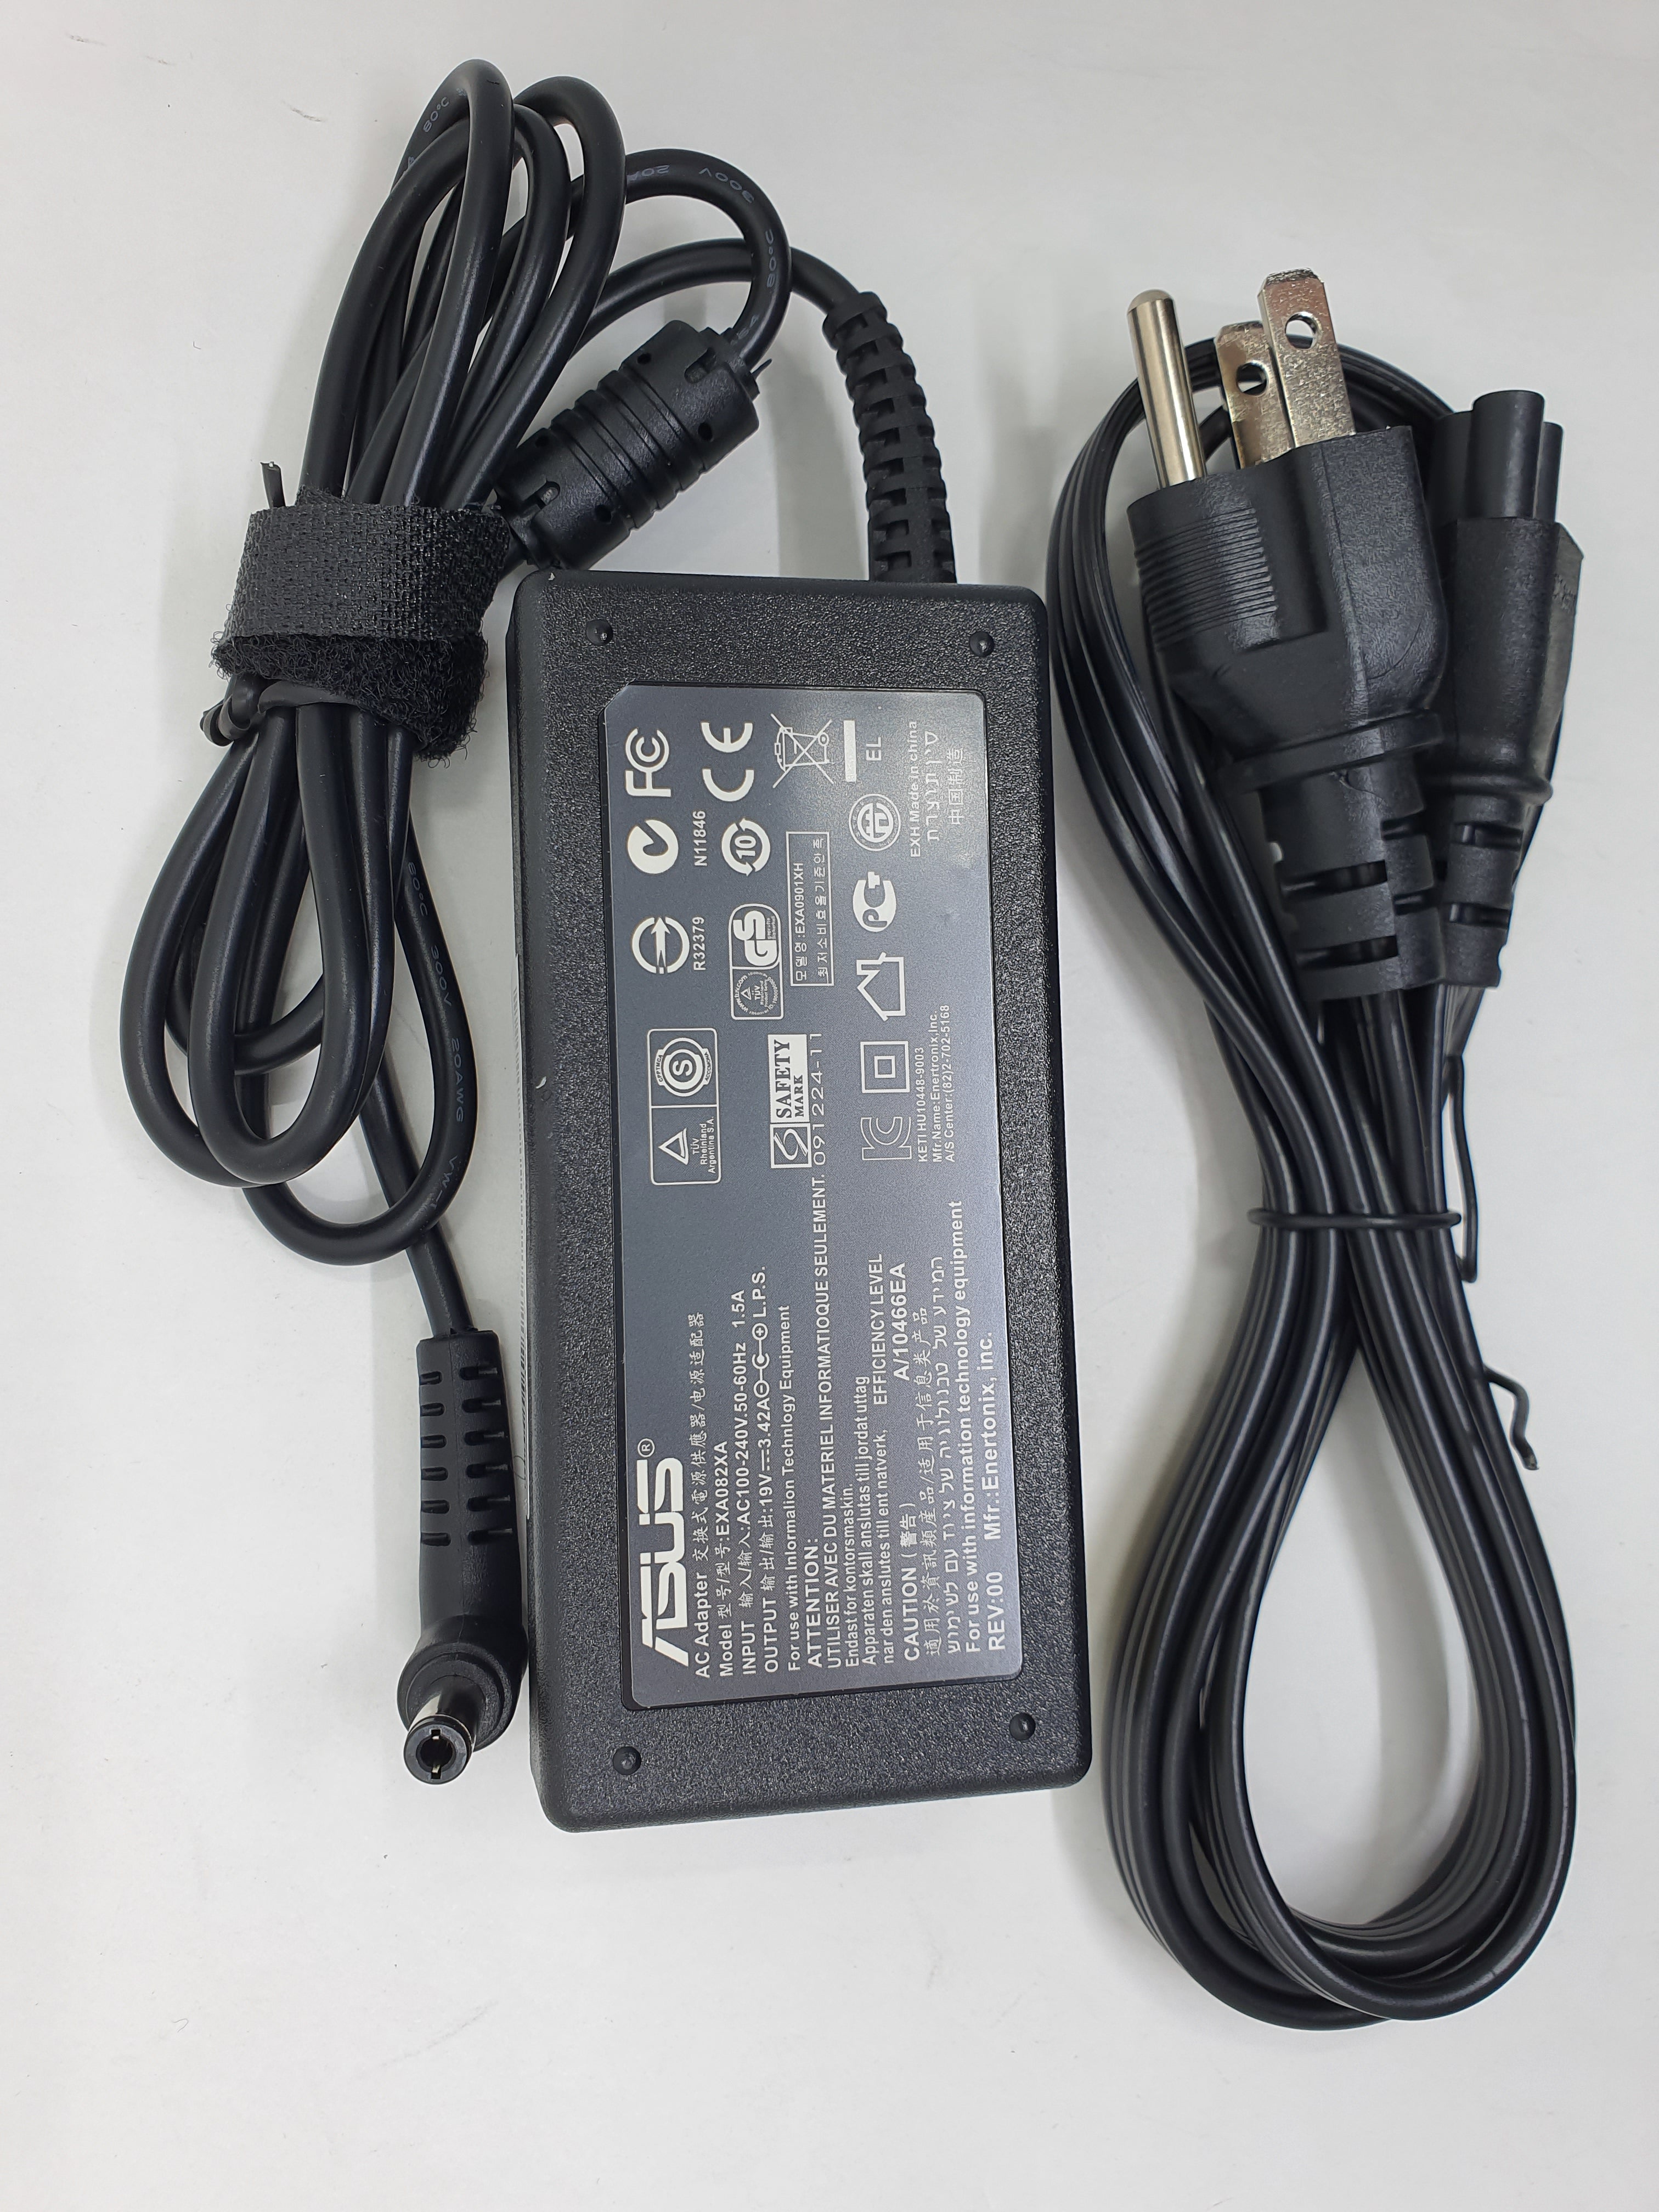 Asus Adapter 65W 19V 5.5 x 2.5 RP A1